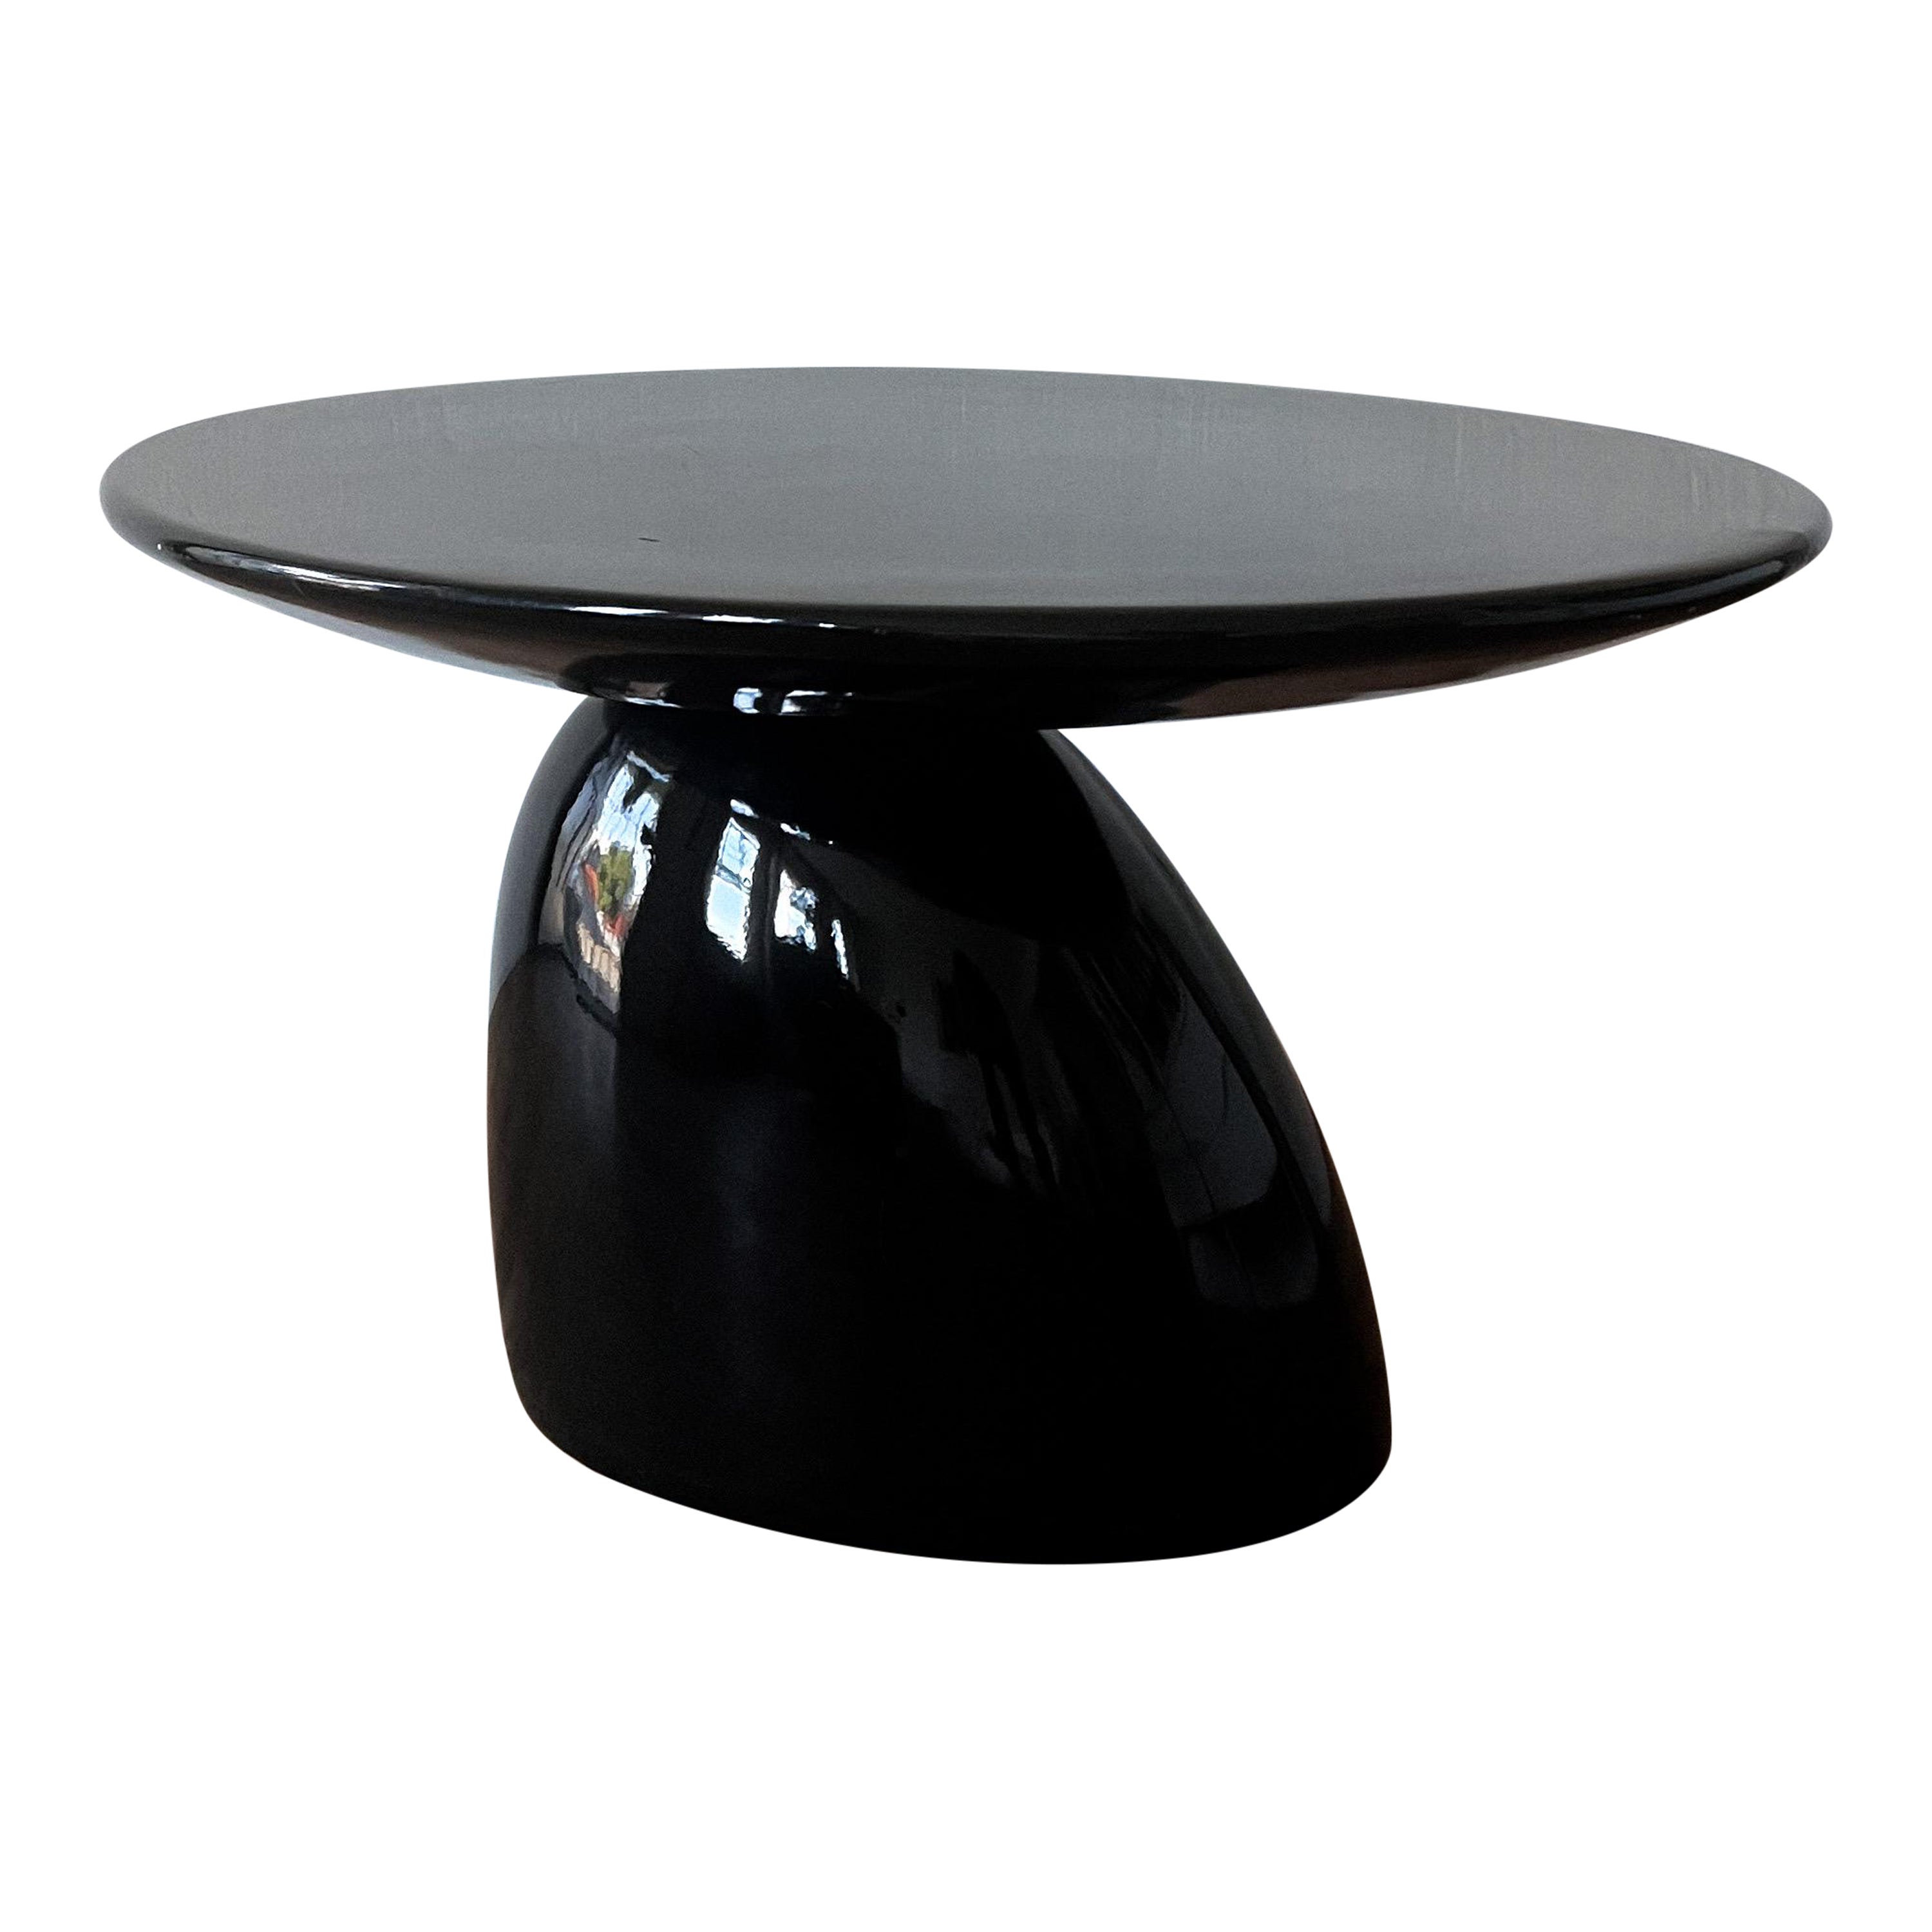 Space Age “Parabel” Style Side Table Attributed to Eero Aarnio For Sale